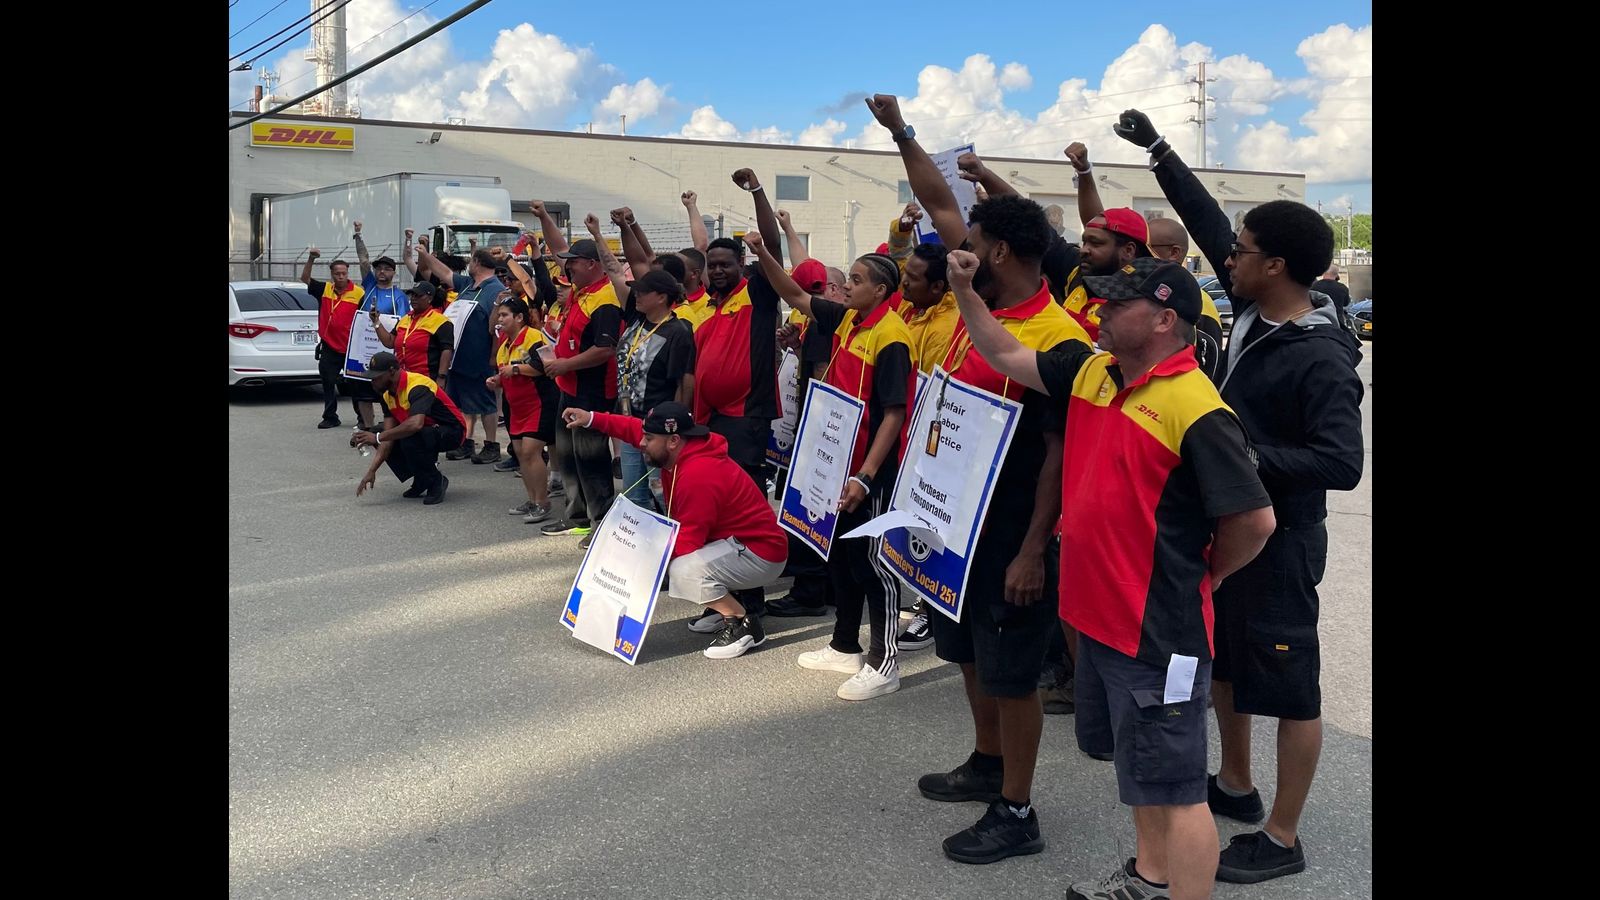 DHL strike in Rhode Island for livable wages and affordable health care